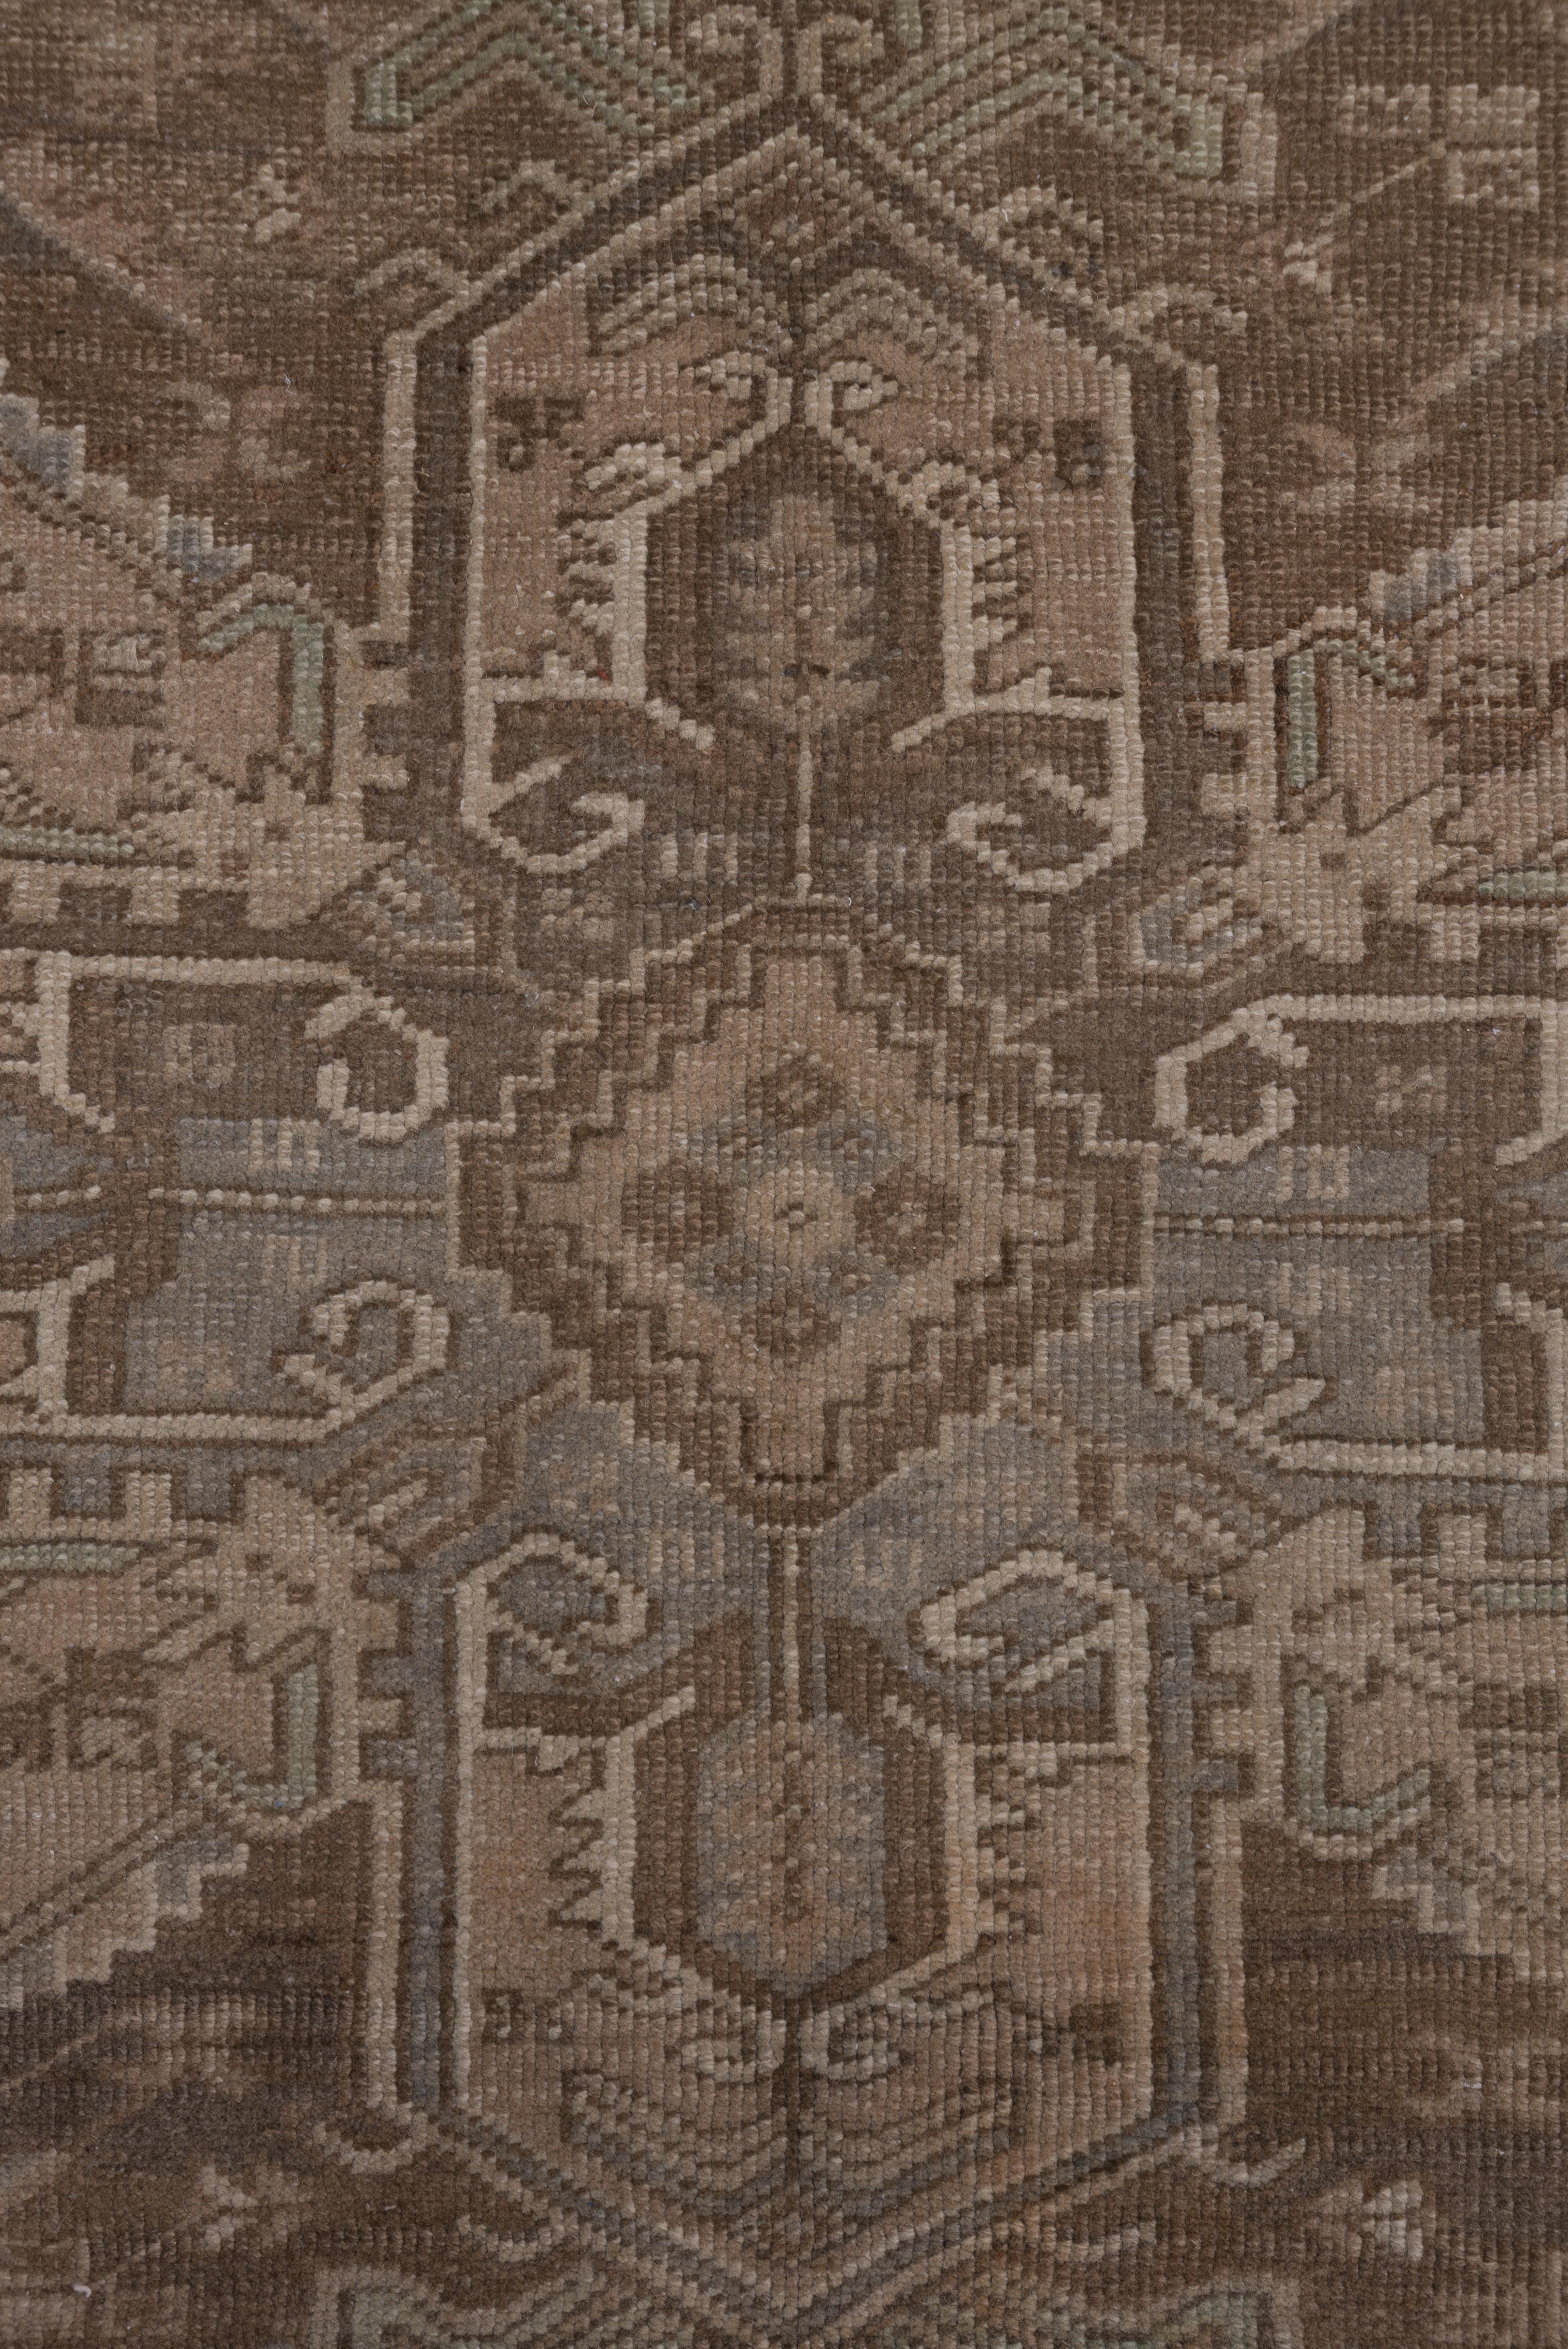 Hand-Knotted Antique Heriz Carpet with Neutral Palette, circa 1910s